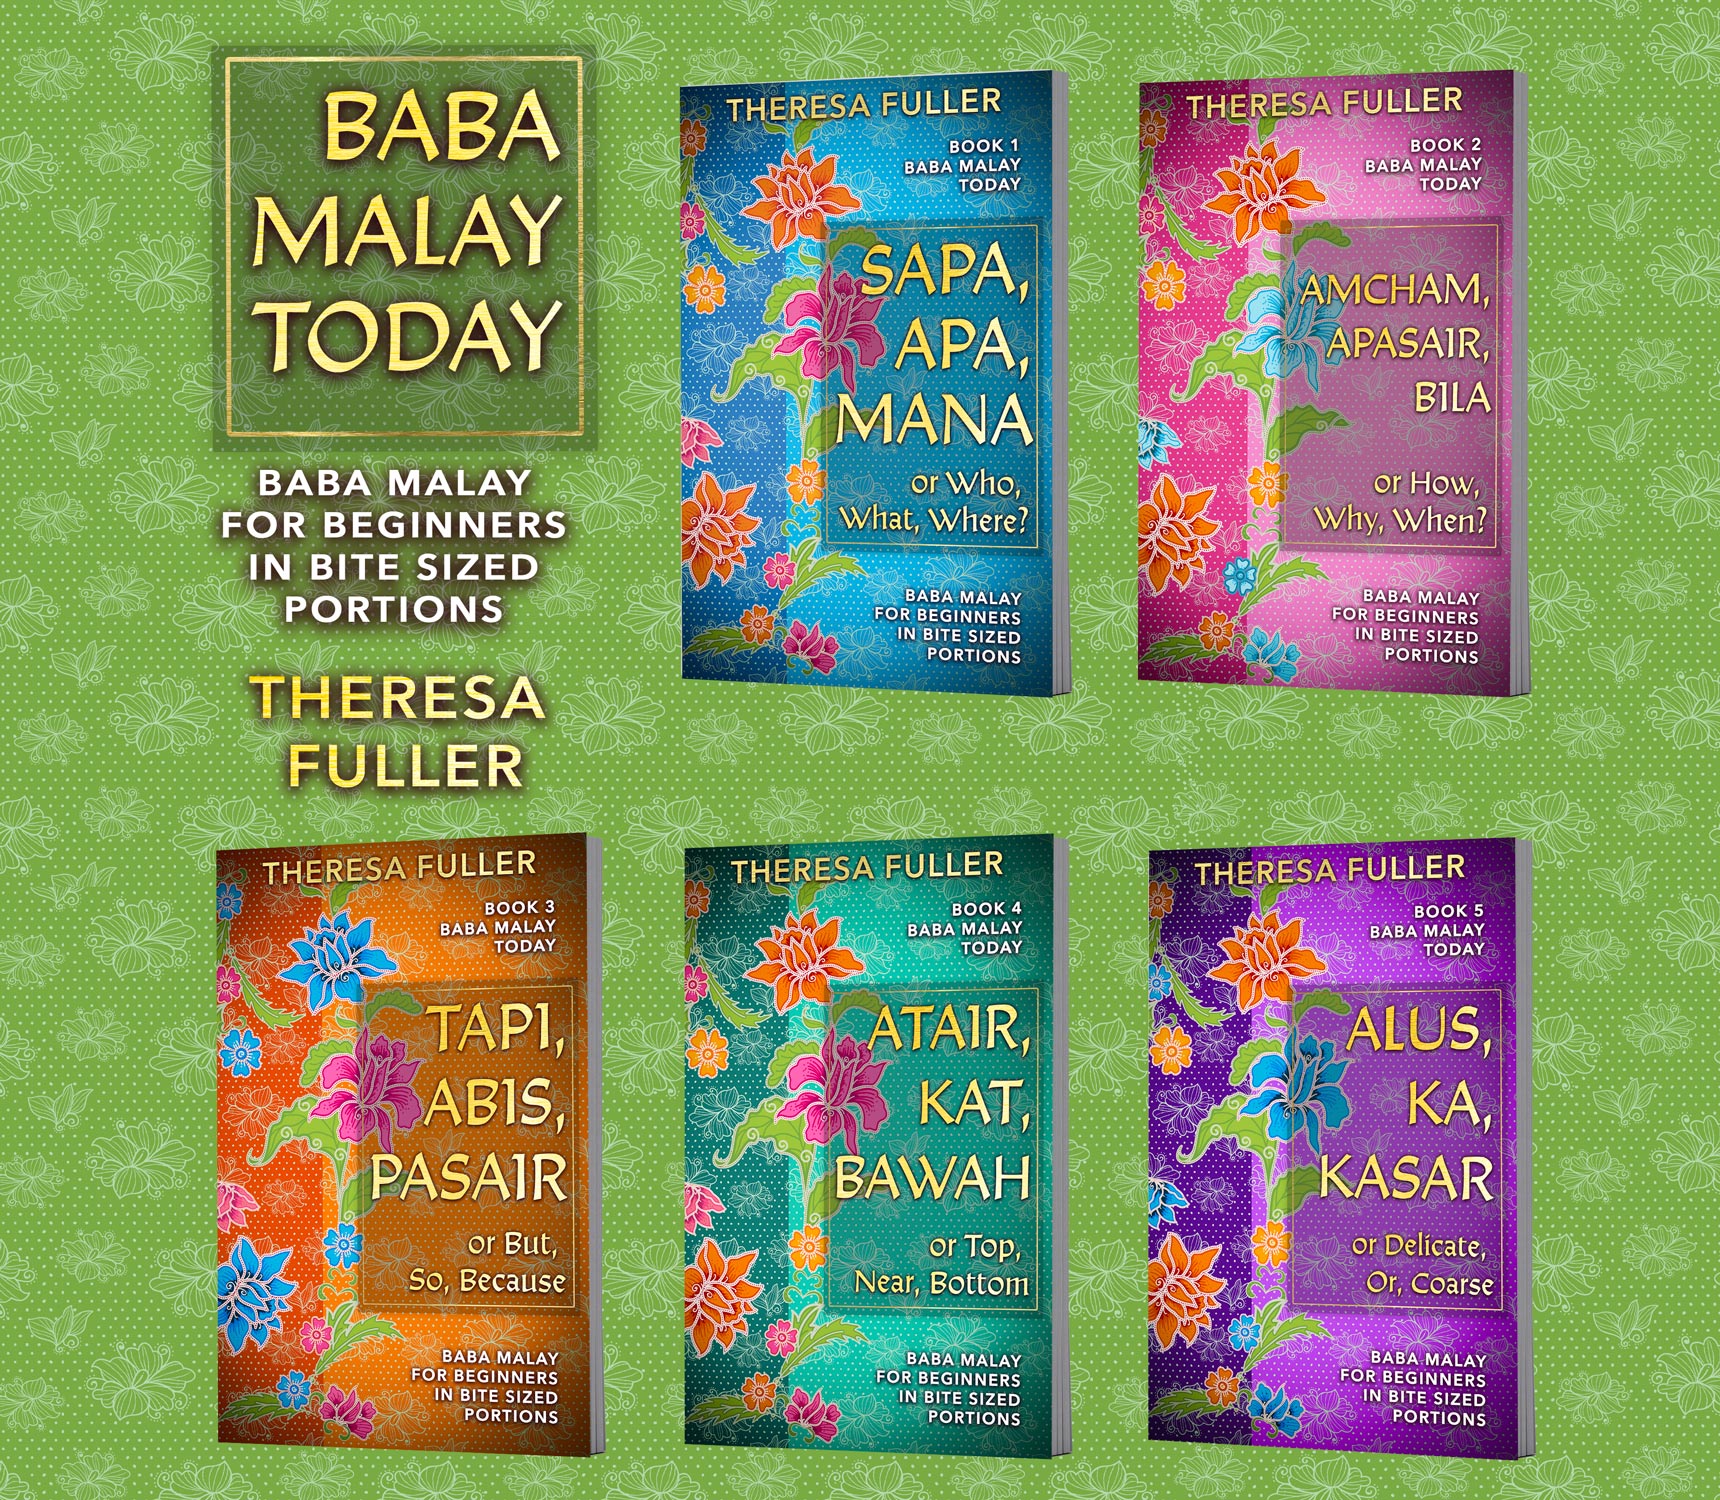 Baba Malay Today Banner showing 5 out of 8 books.